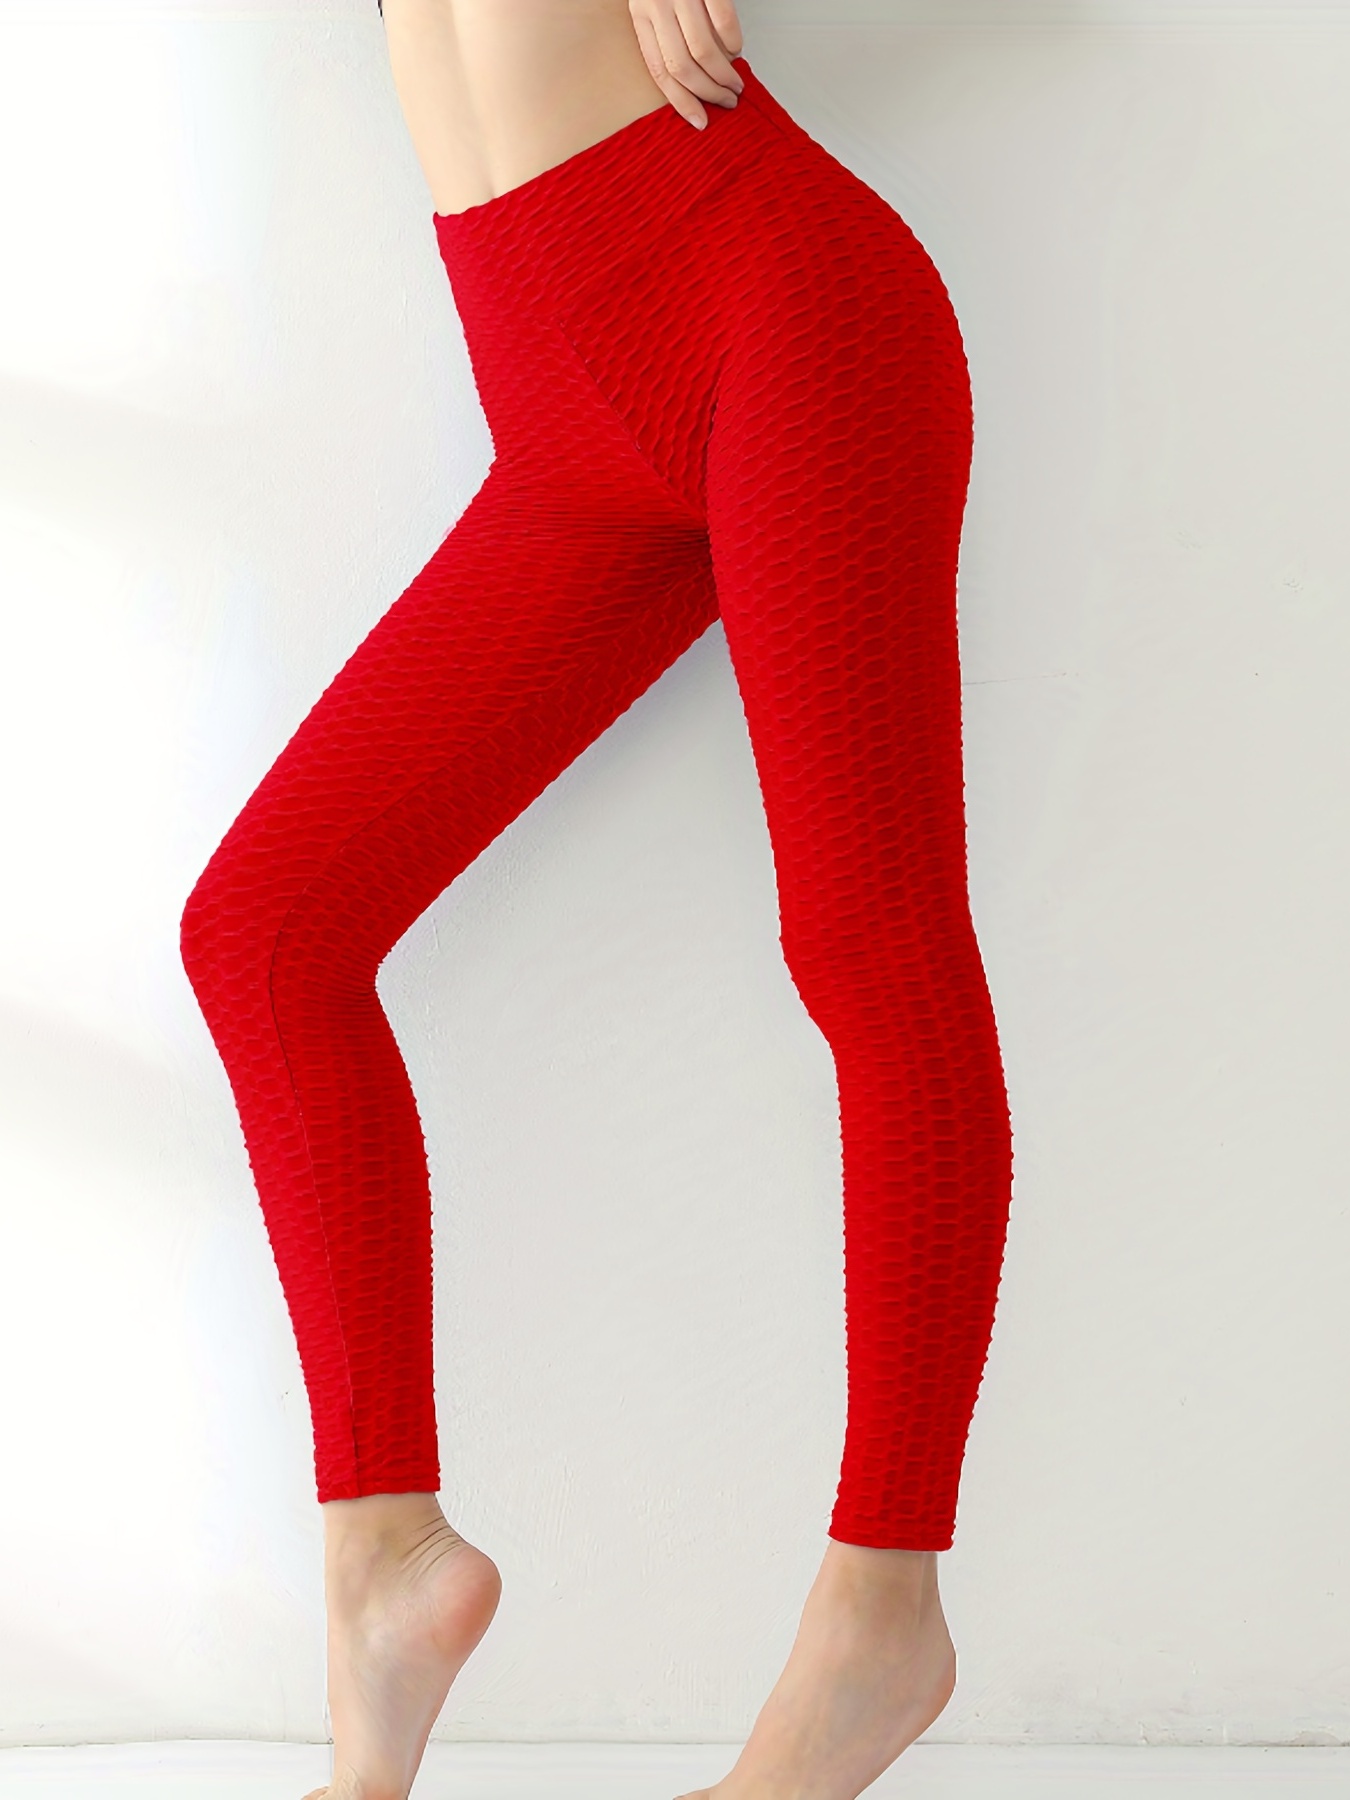  Womens Cotton/Spandex Yoga Pants Solid Red 2X